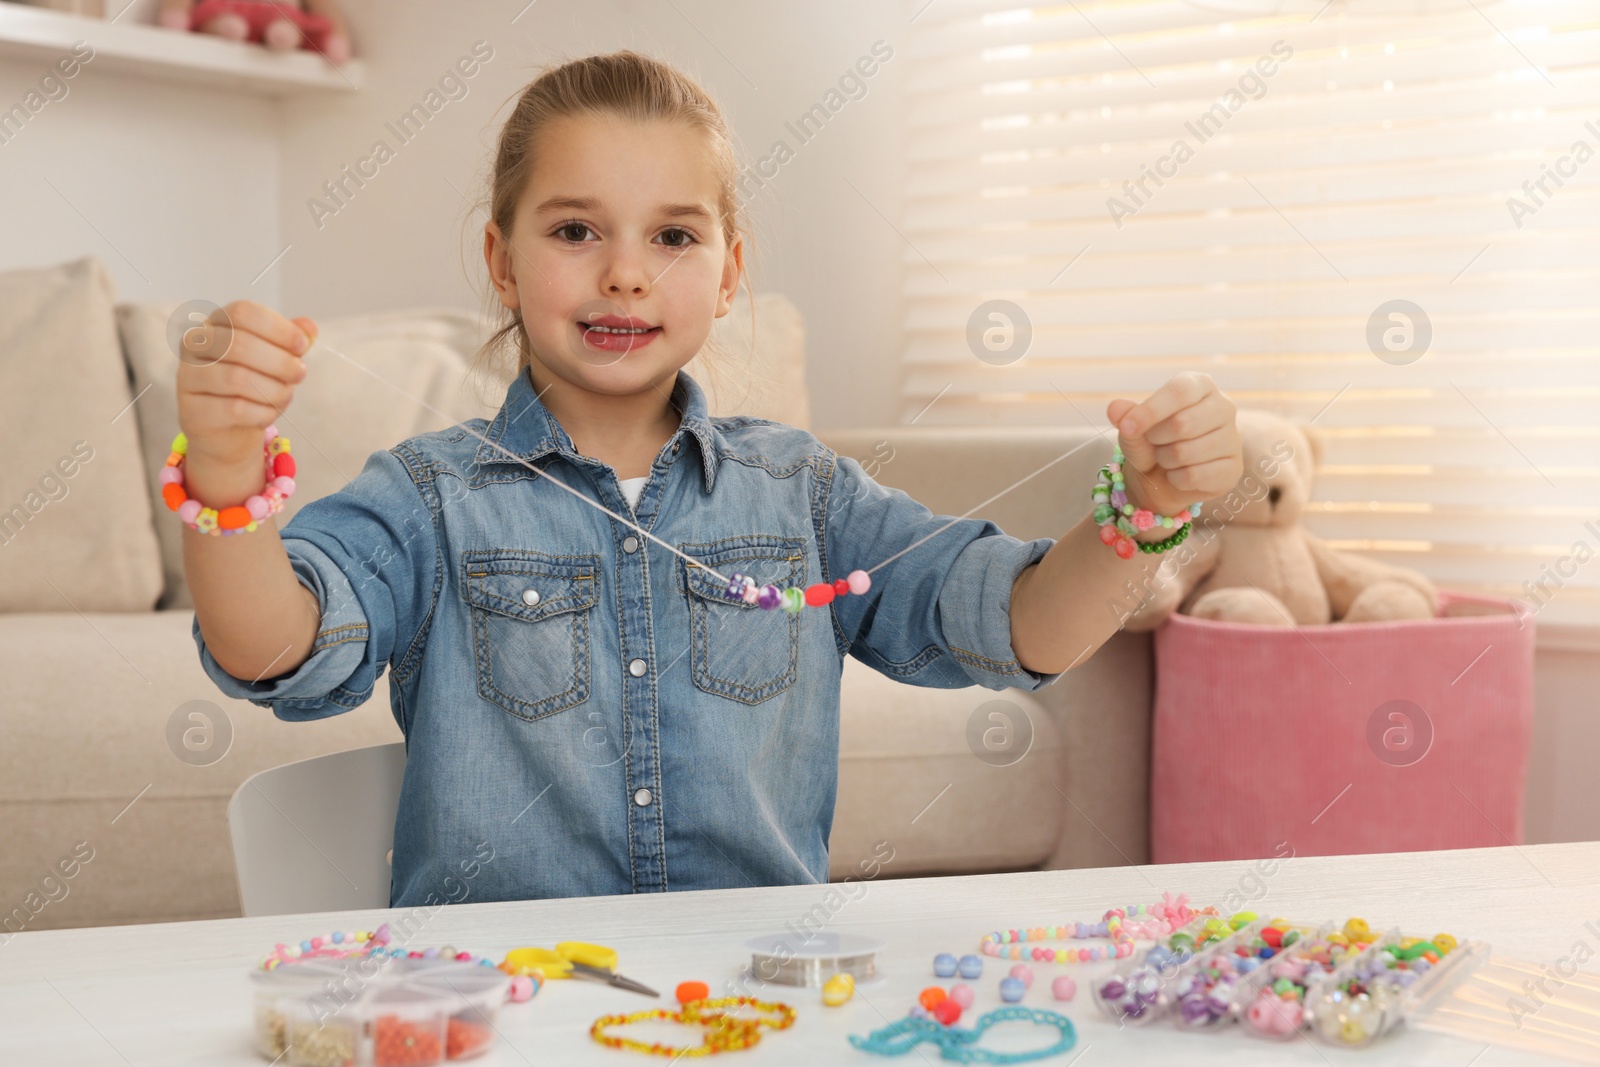 Photo of Cute little girl making beaded jewelry at table in room